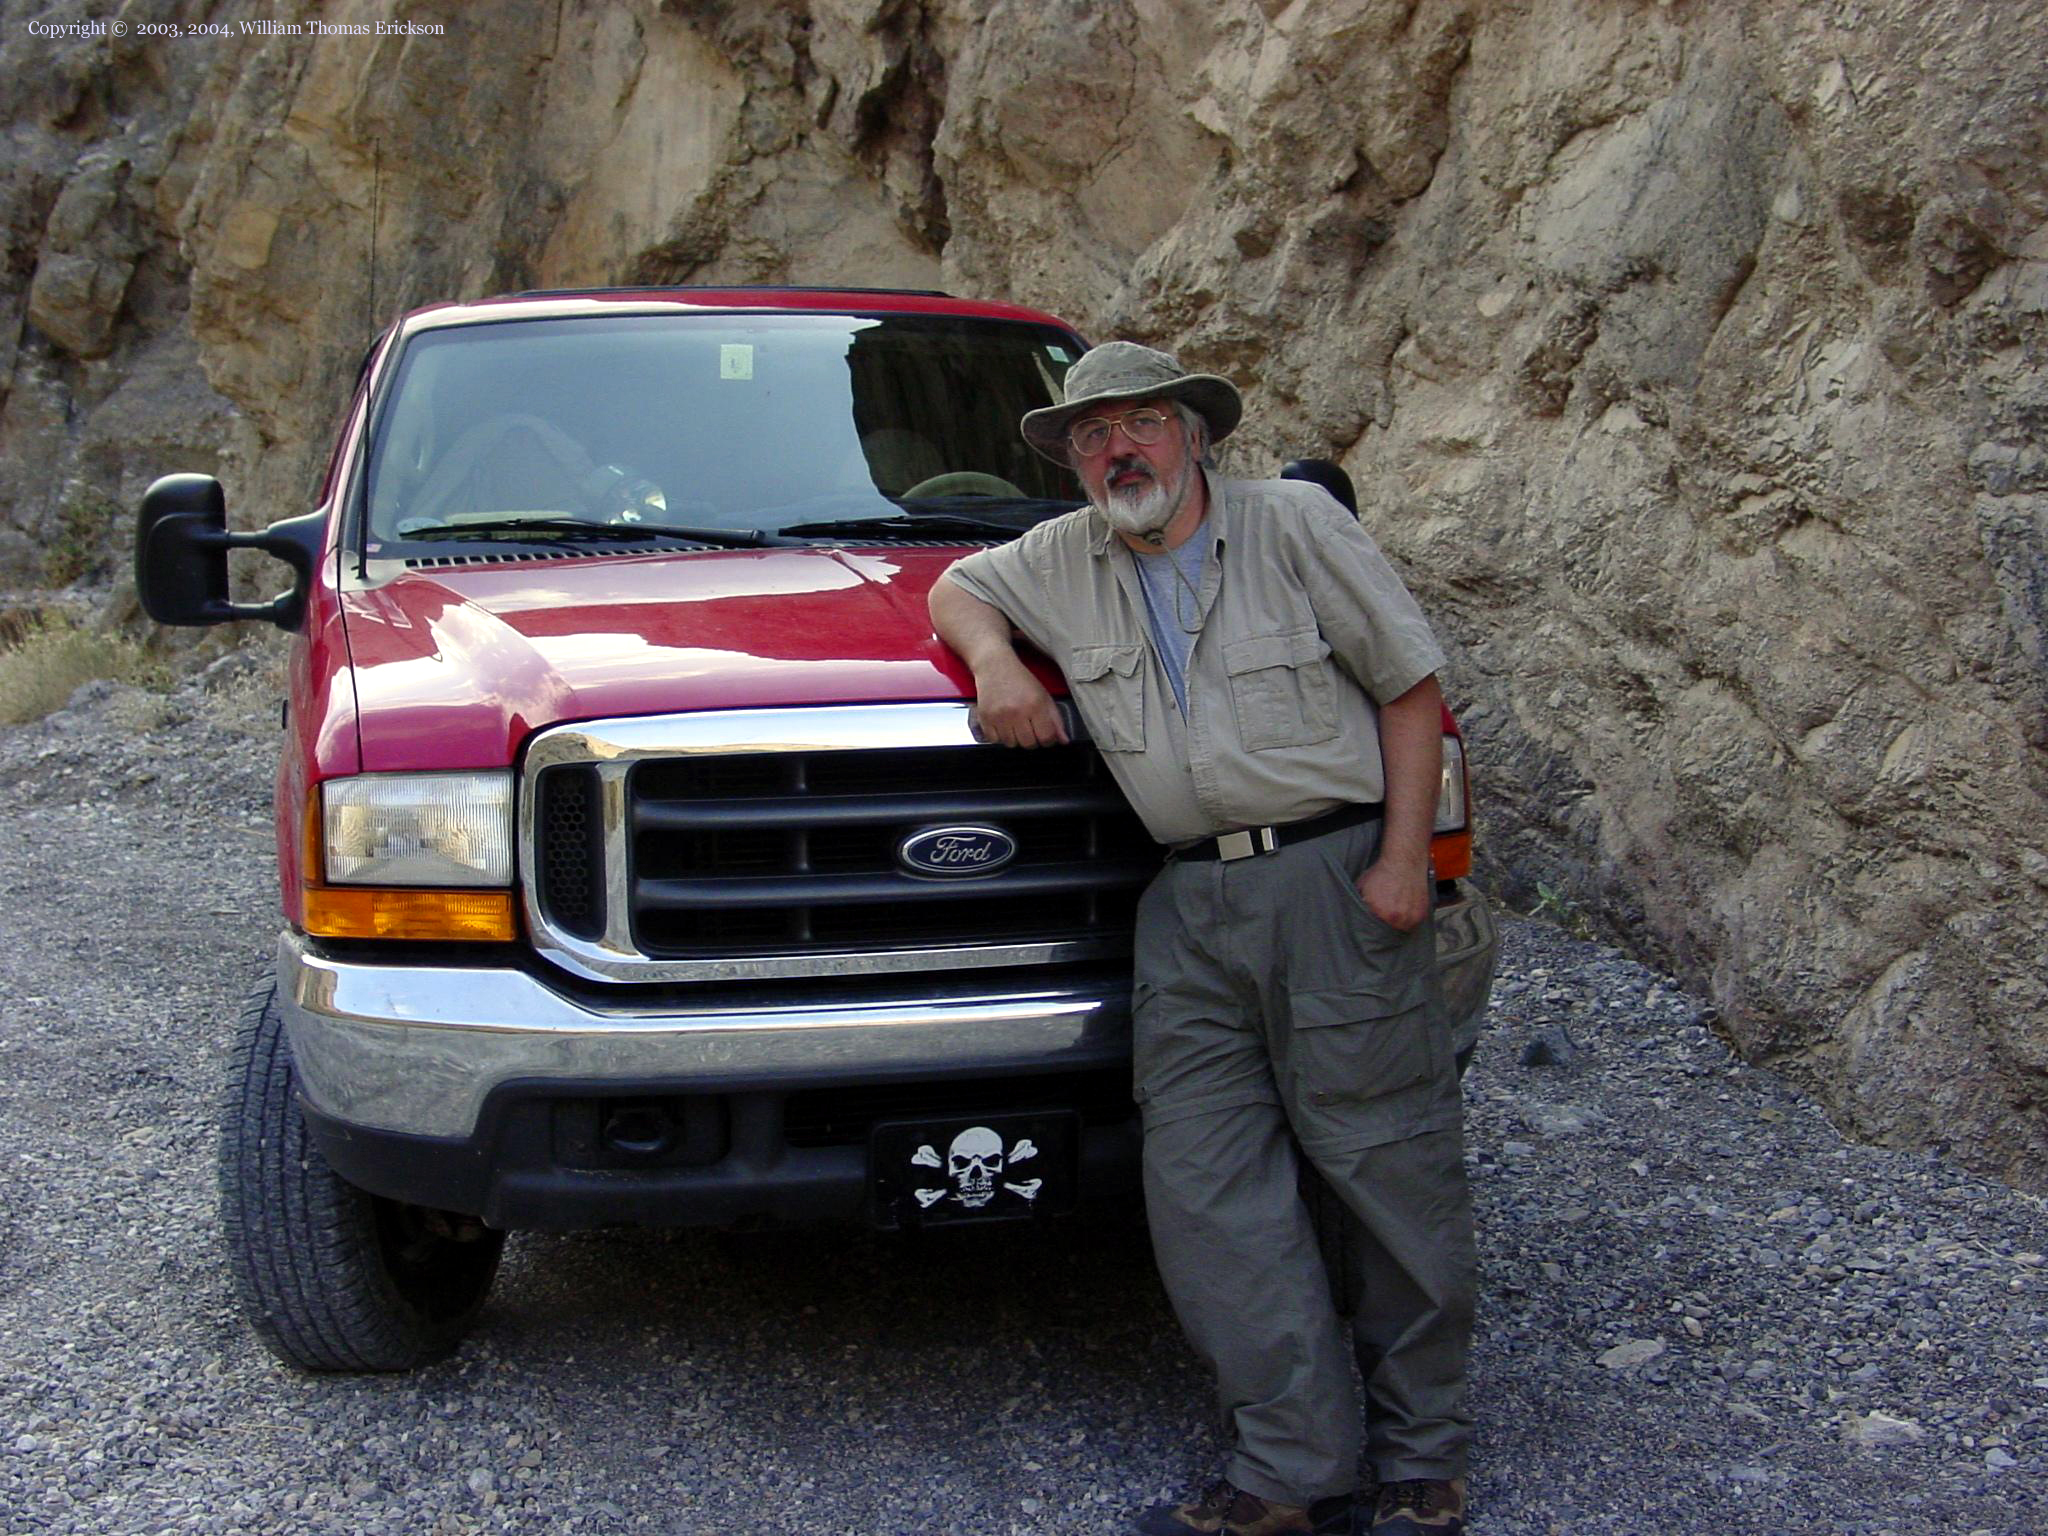 Wm T Erickson in Grotto Canyon, Death Valley, USA. There are places in Death Vally with interesting lighting and acoustics, and Wm T Erickson can get you and your gear there and back safely and efficiently.